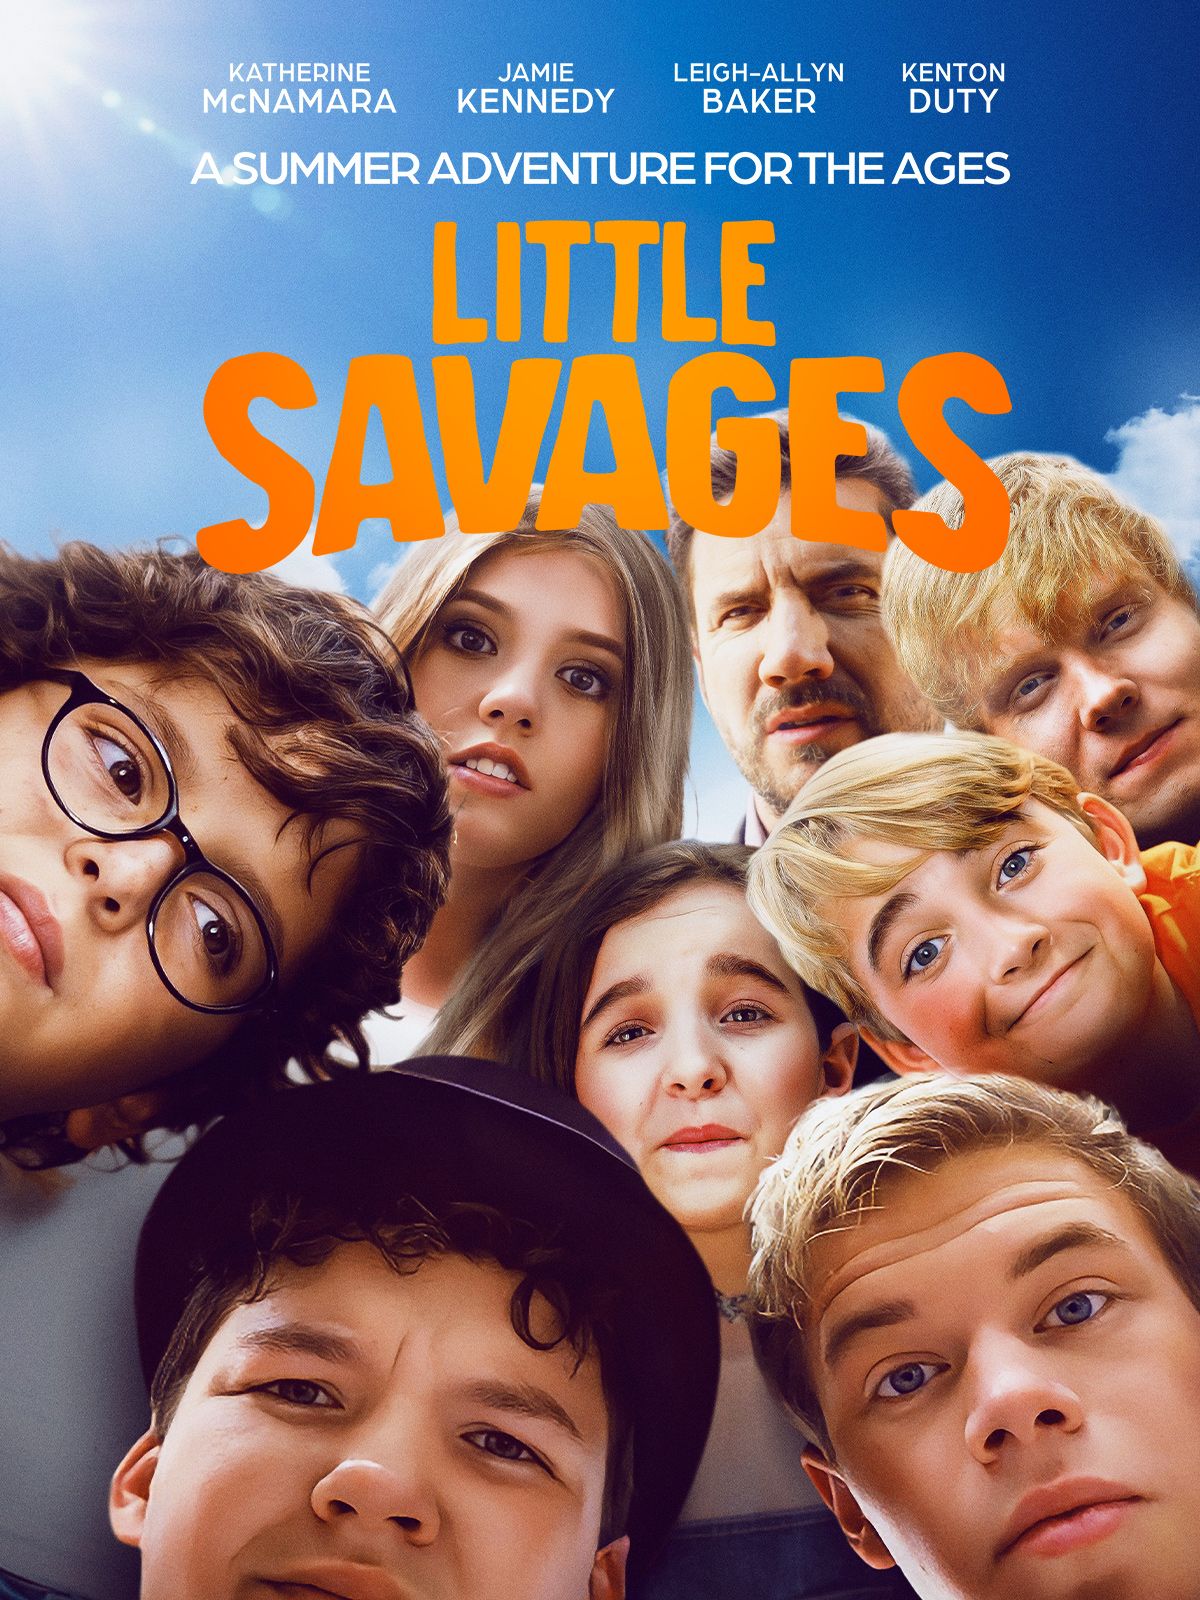 Keyart for the movie Little Savages